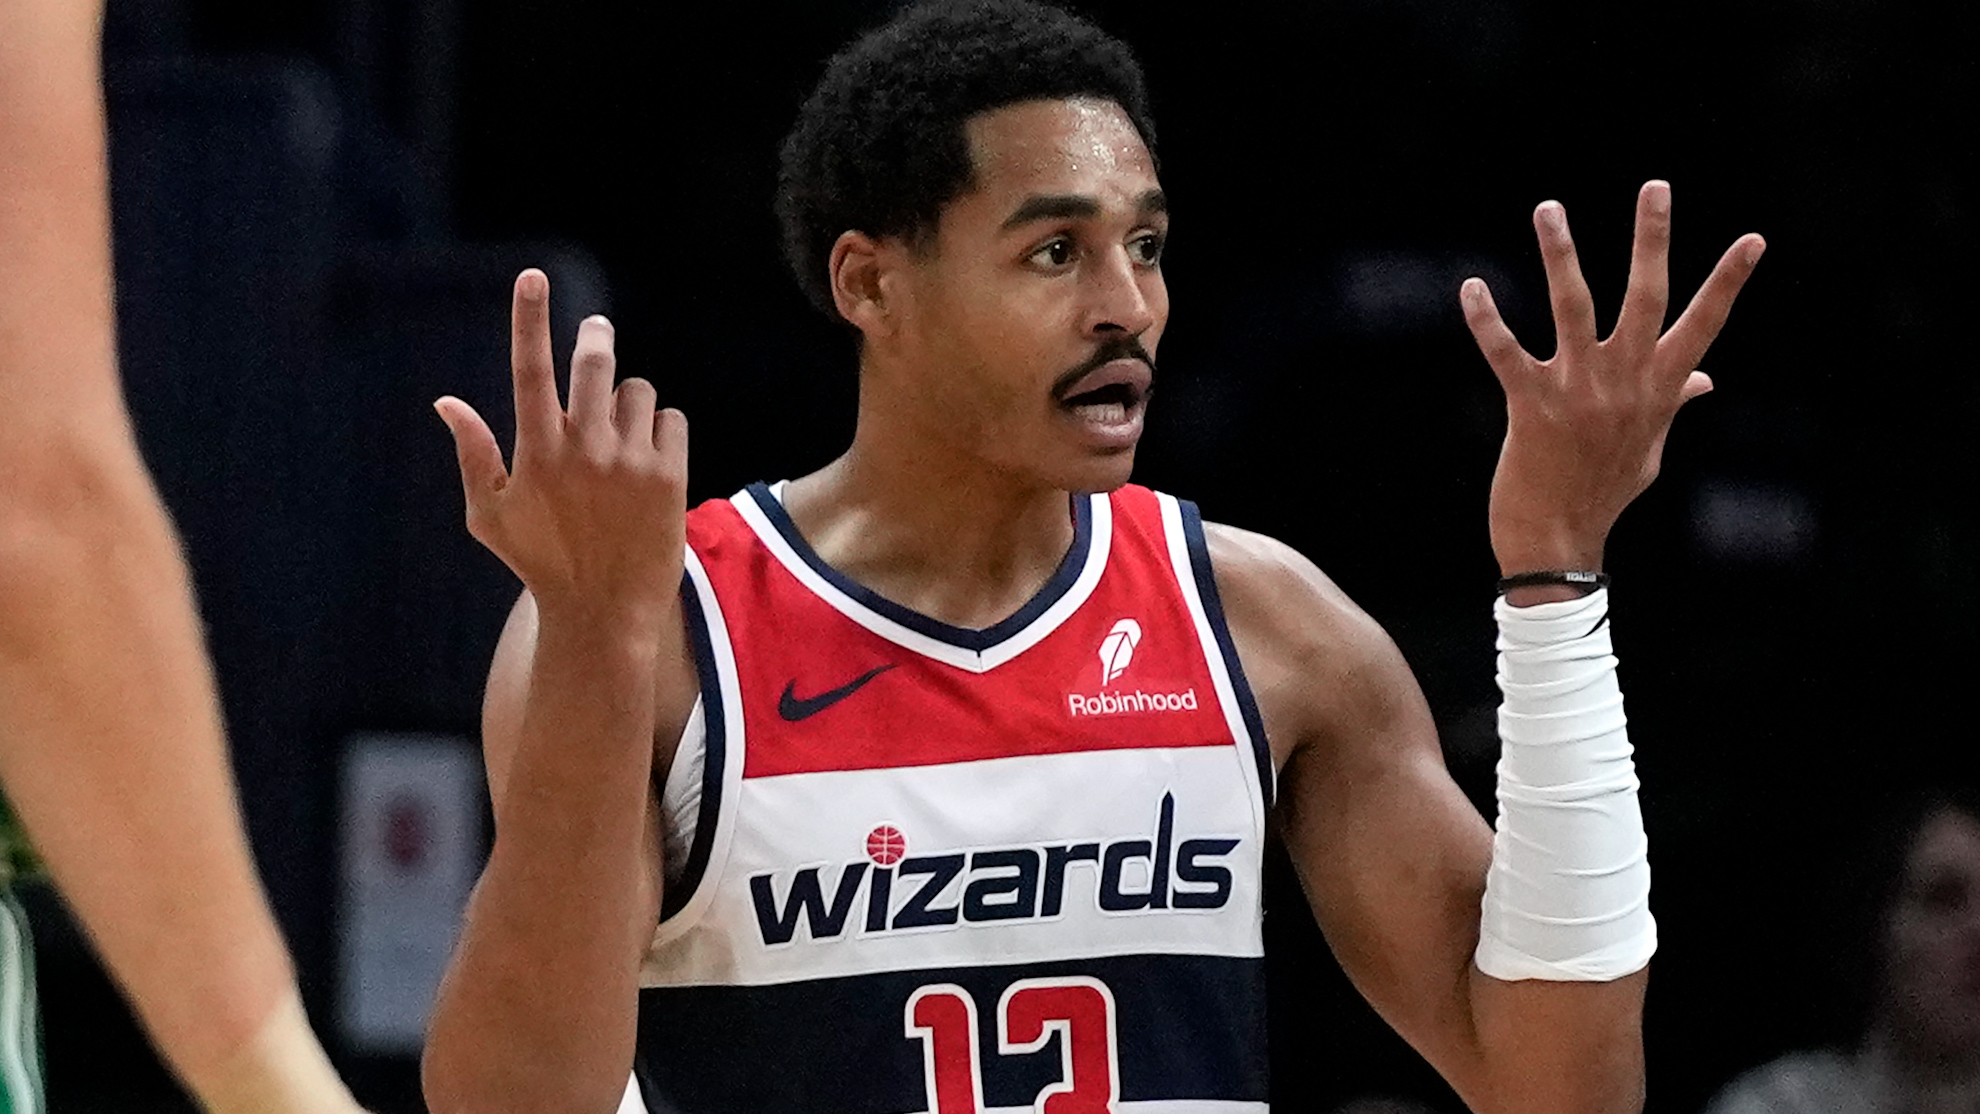 Jordan Poole breaks silence and defends himself after Wizards